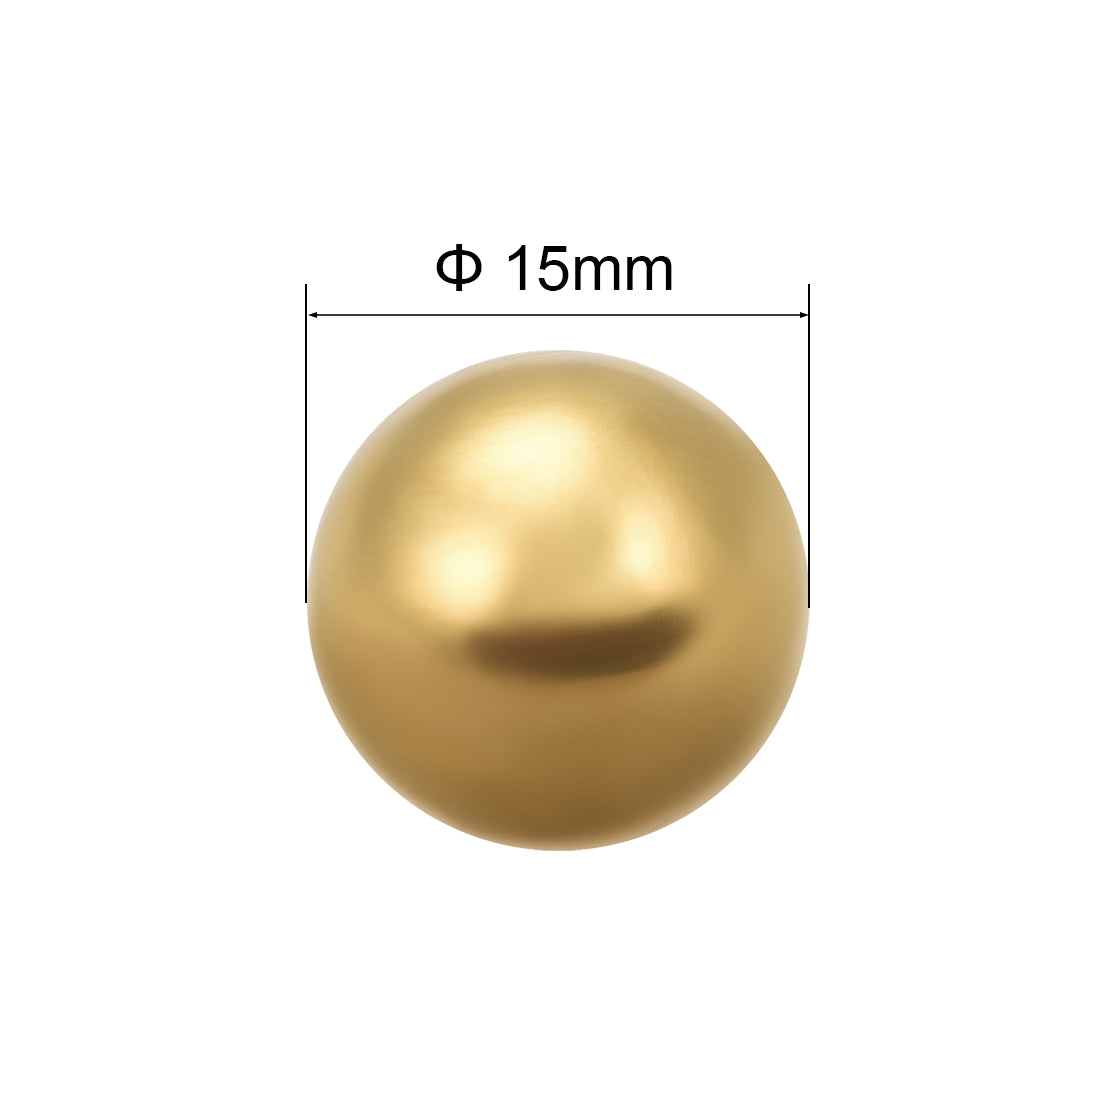 Uxcell Uxcell 15mm Precision Solid Brass Bearing Balls 5pcs